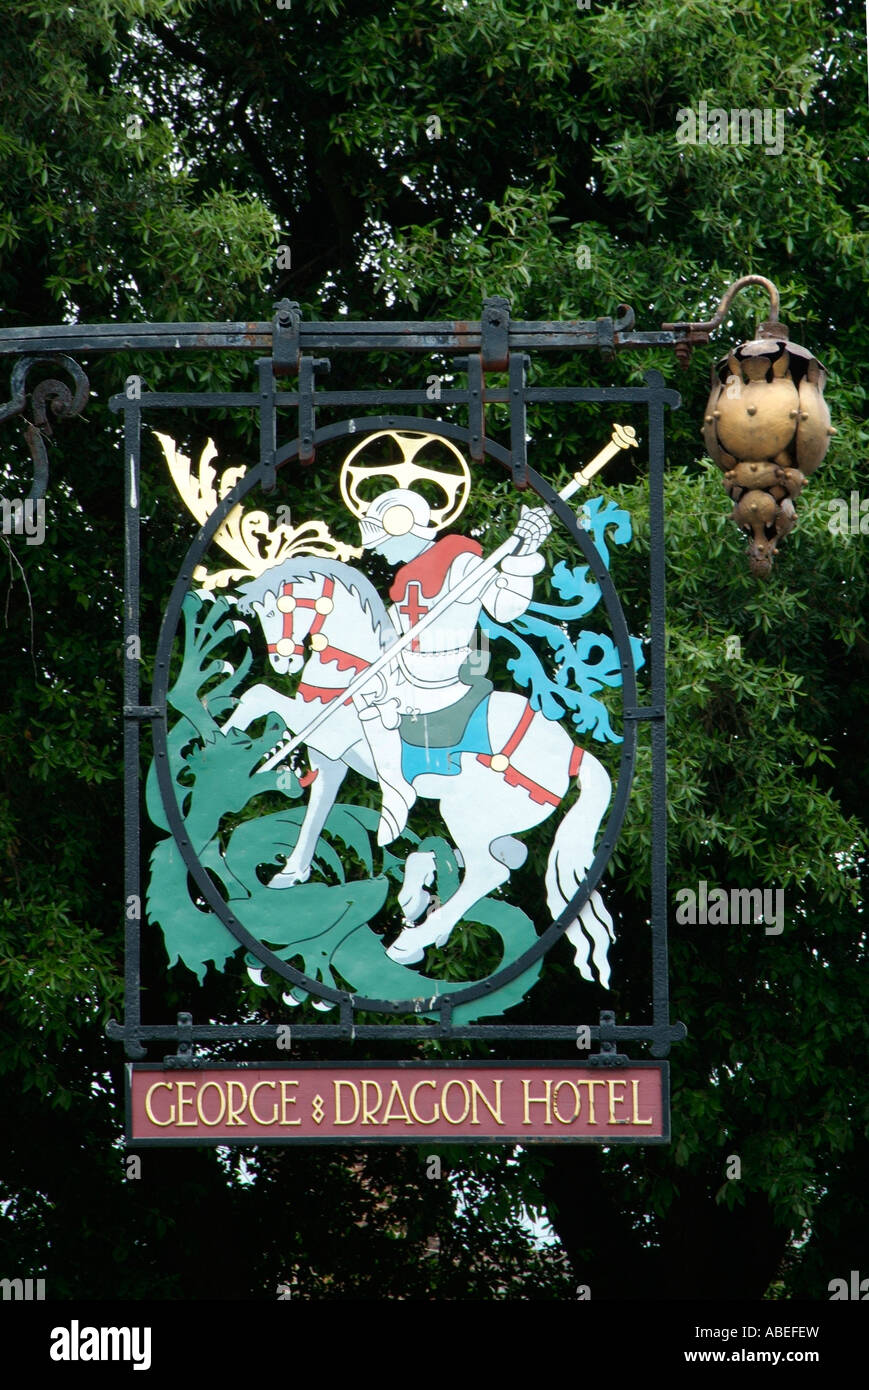 George Dragon hotel Pub sign square on mythical inn ale beer advertising great budworth village Northwich Cheshire England UK Br Stock Photo